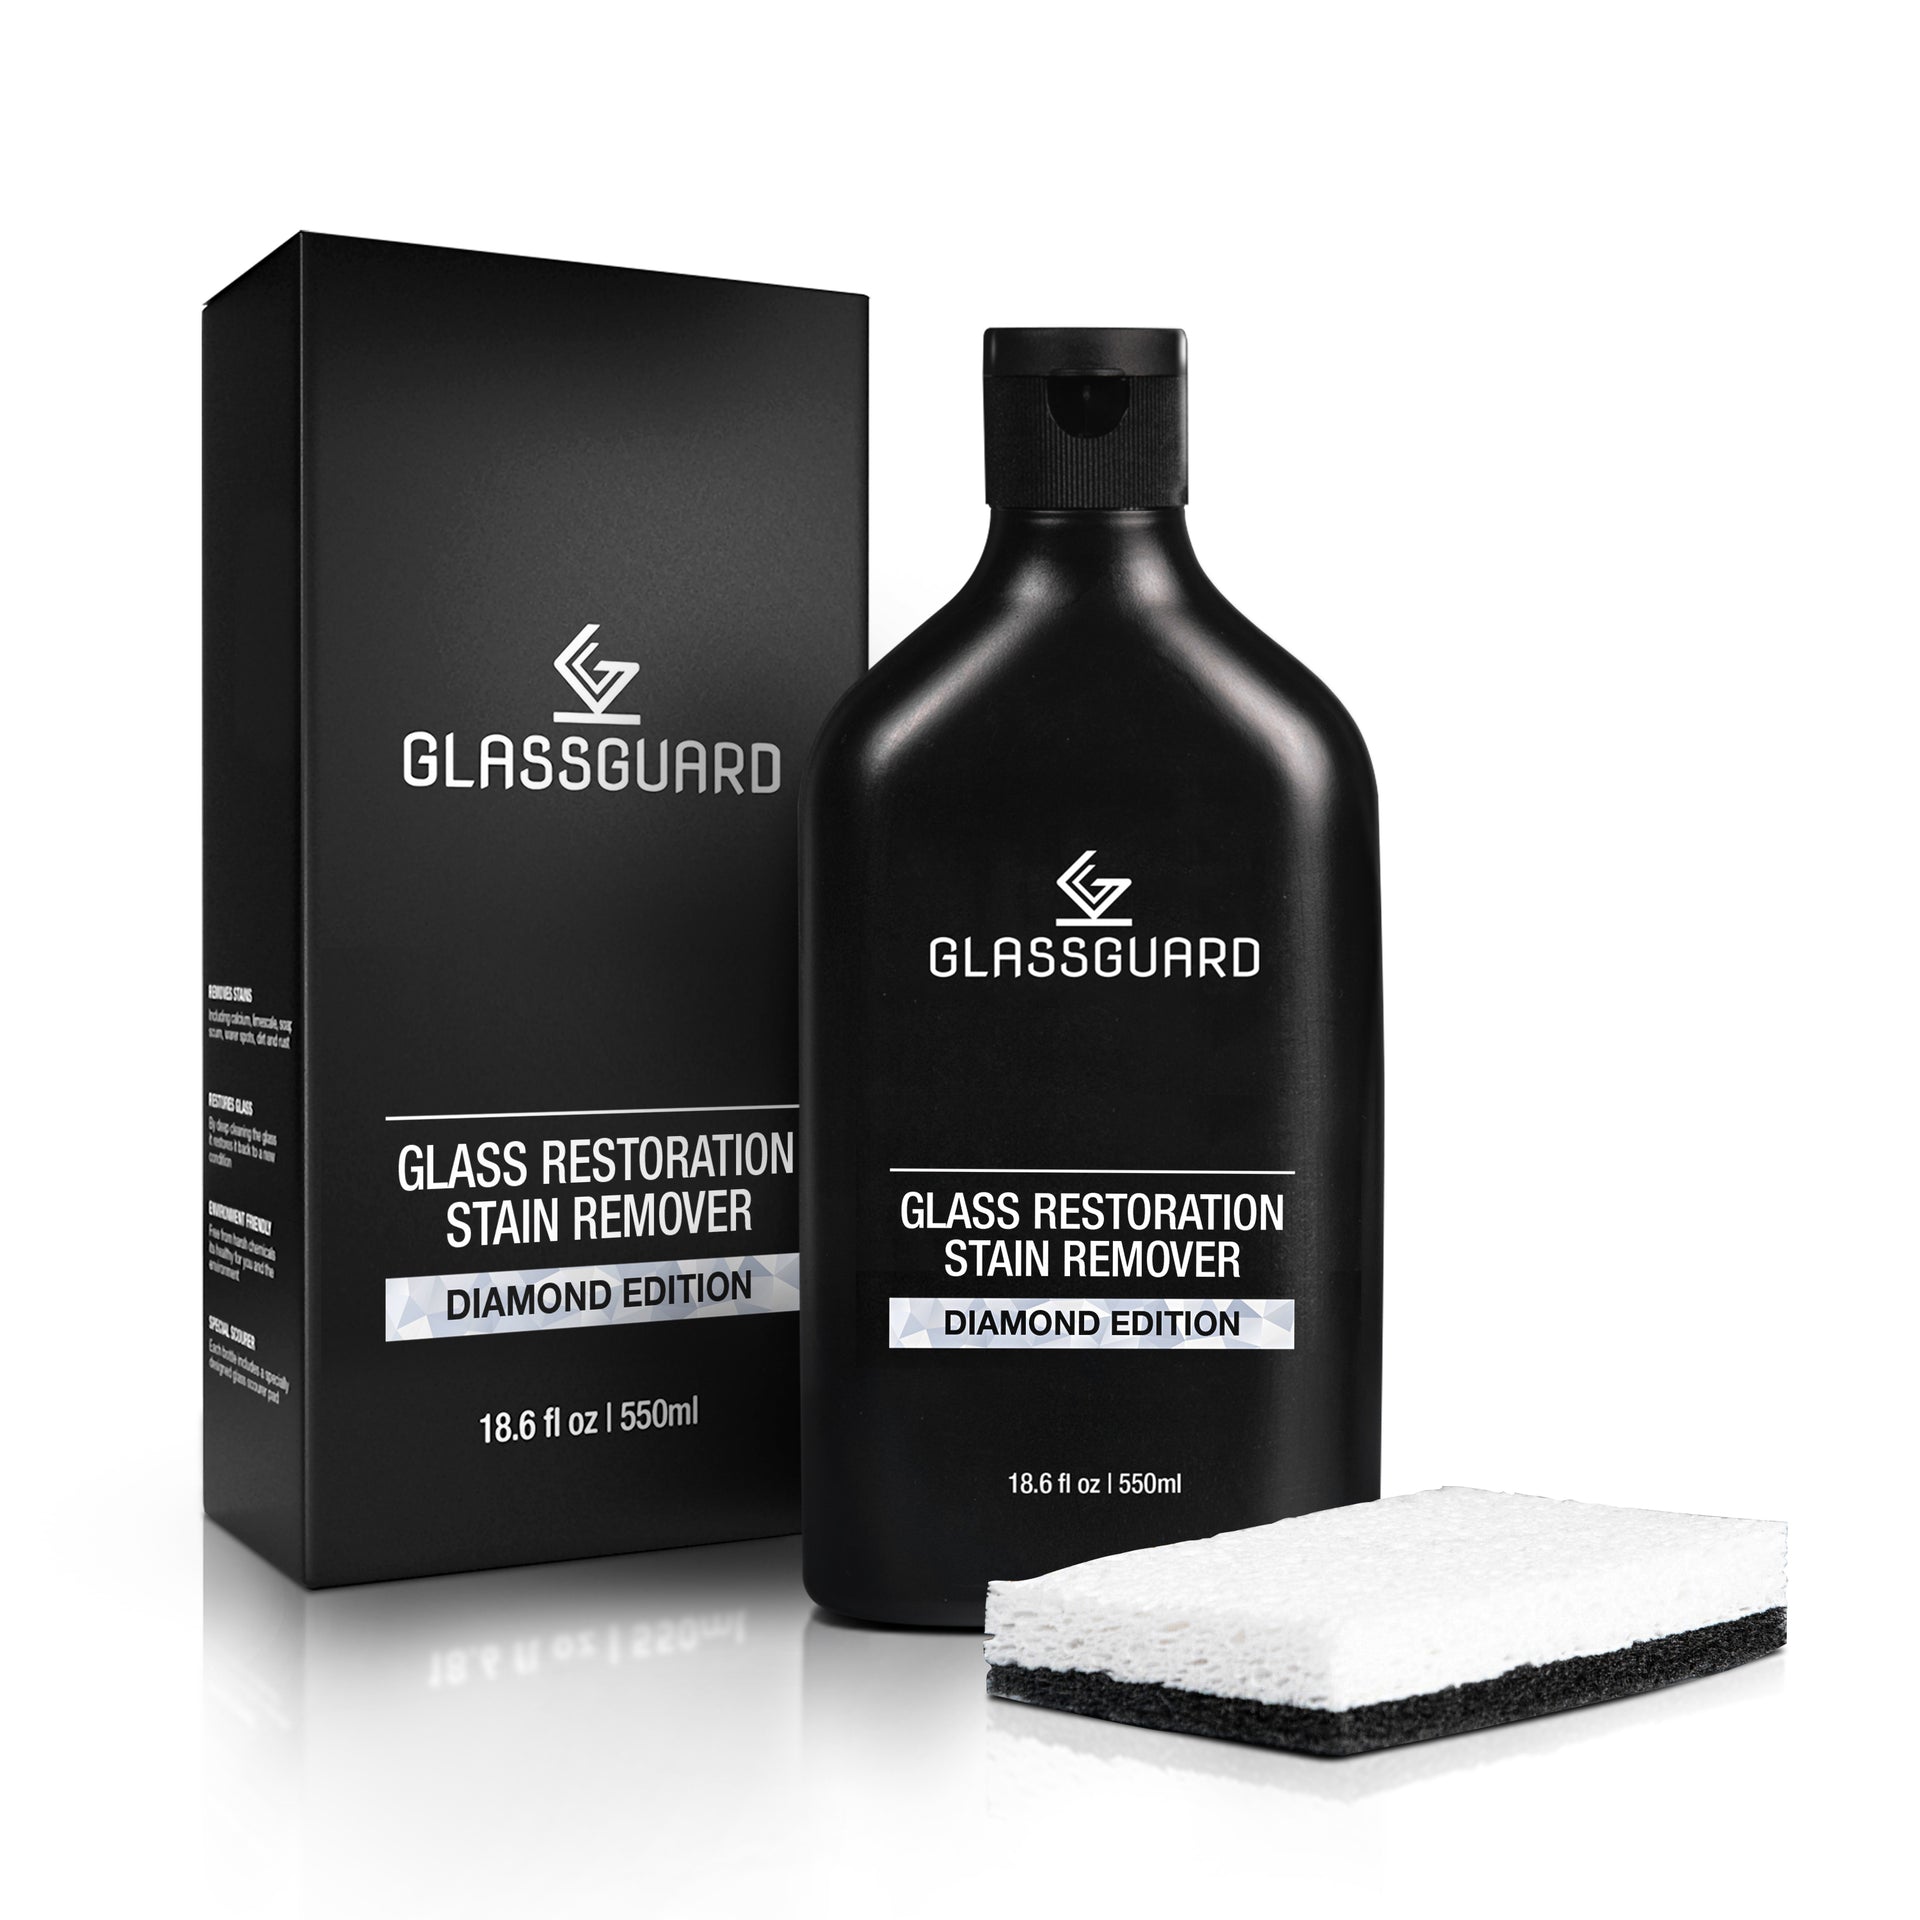 GLASSGUARD Glass Restoration Stain Remover Diamond Edition is a glass, shower screen, and window cleaner for hard water stains